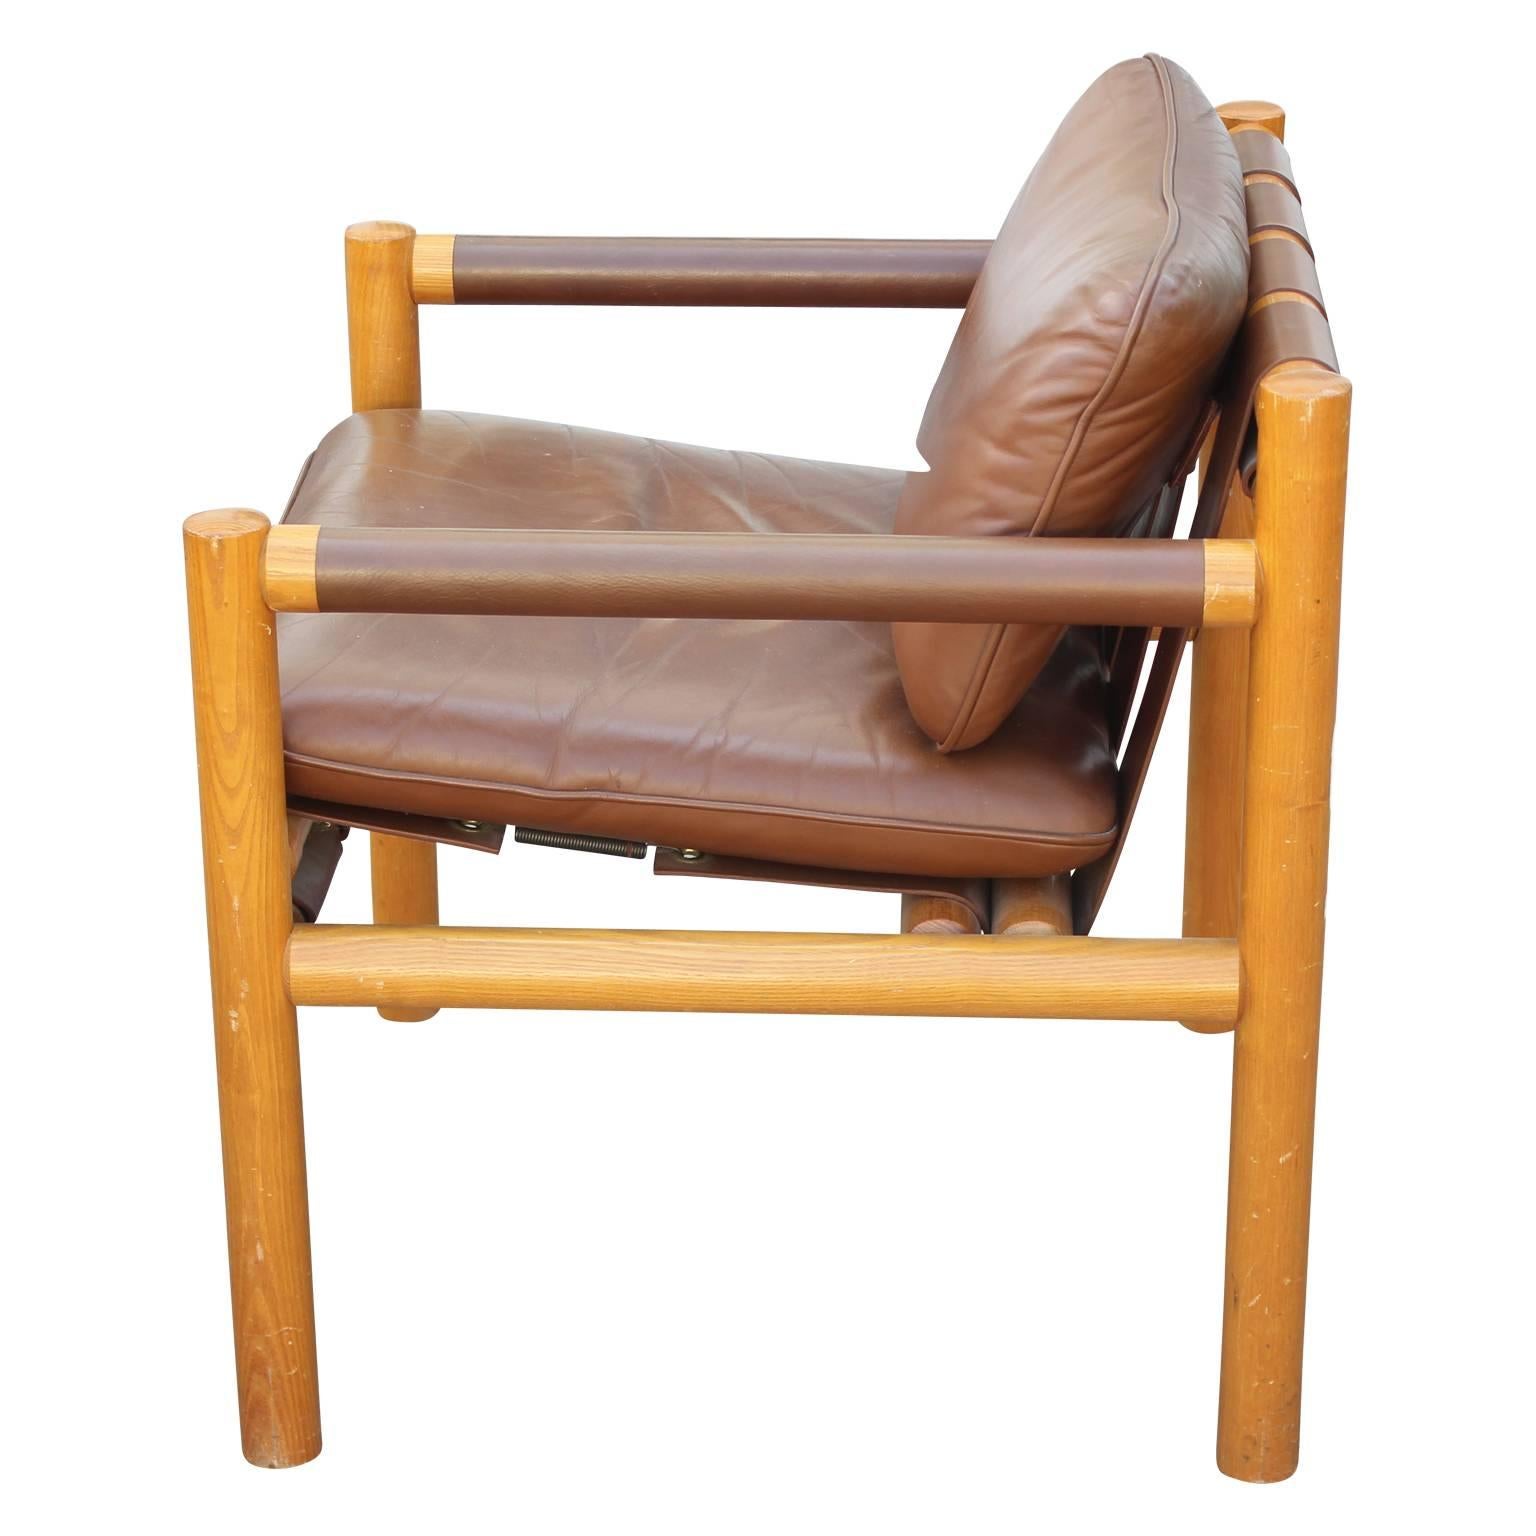 Pair of gorgeous Scandinavian / Danish safari lounge chairs made from gorgeous oakwood and brown leather with upholstered arms. Perfect addition to any space looking for a Mid-Century Modern relaxed touch. 

We have two sets available.